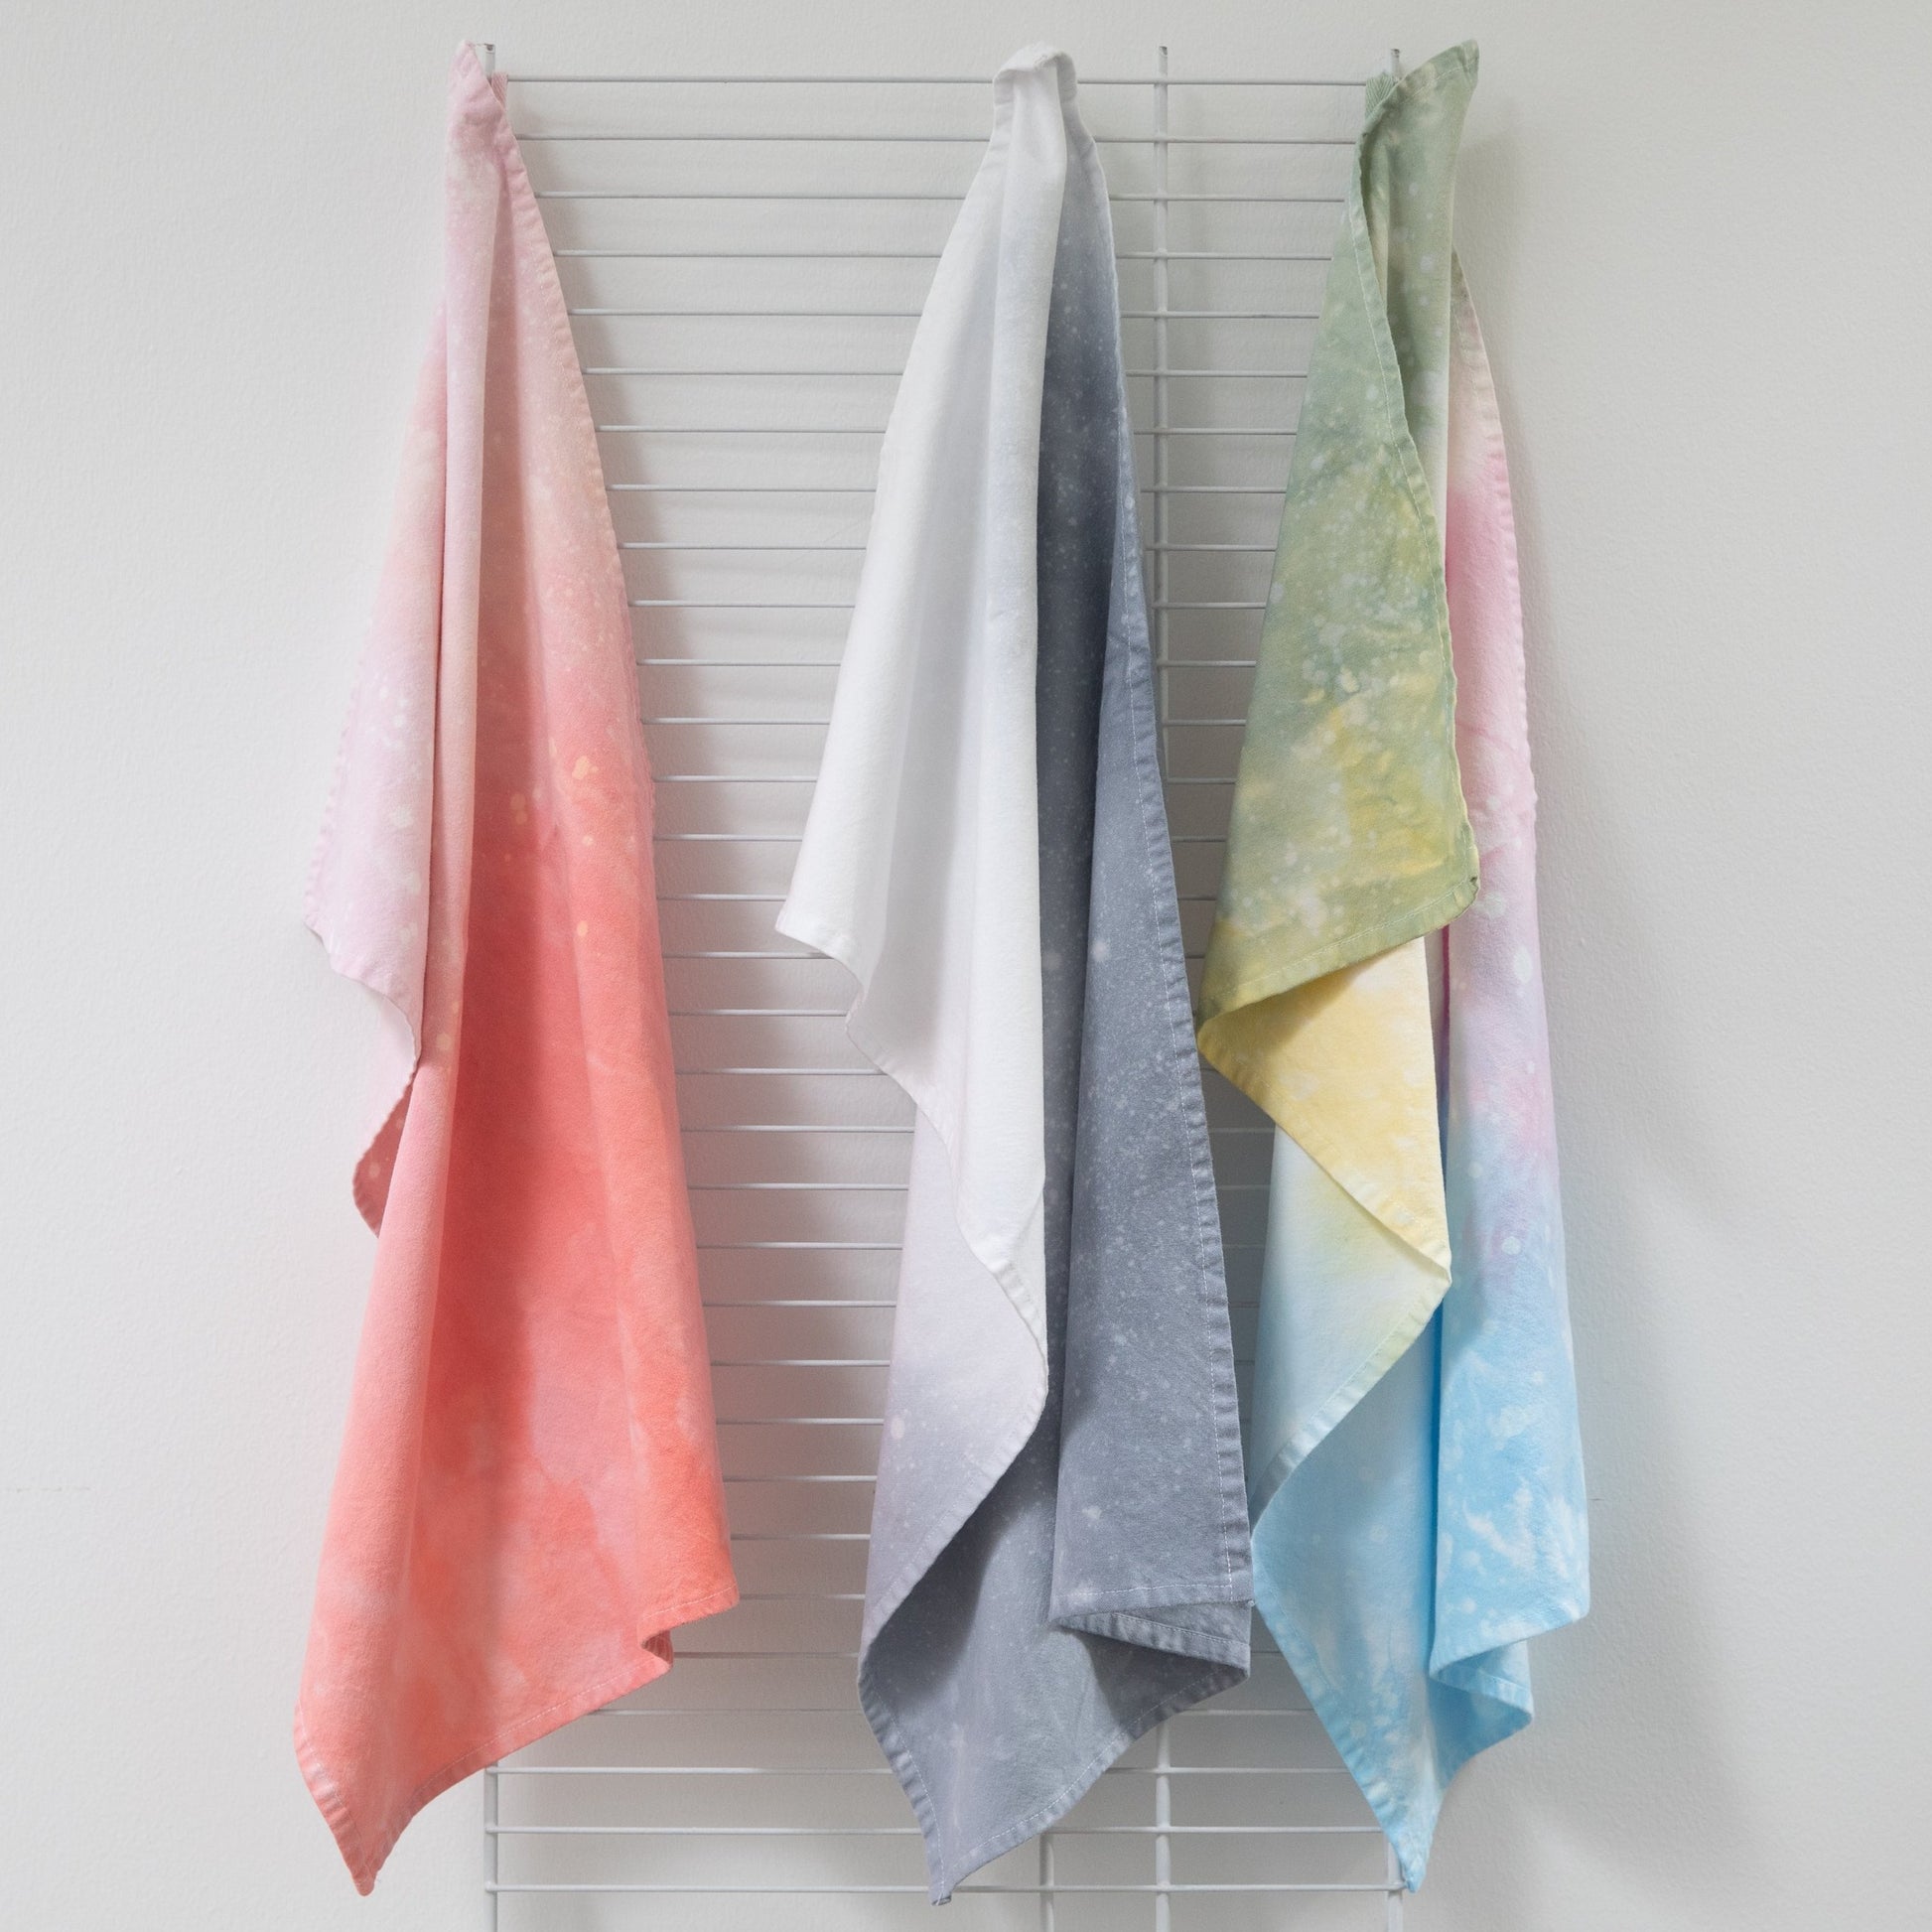 Set of 3 Coral Hand-Dyed Tea Towels